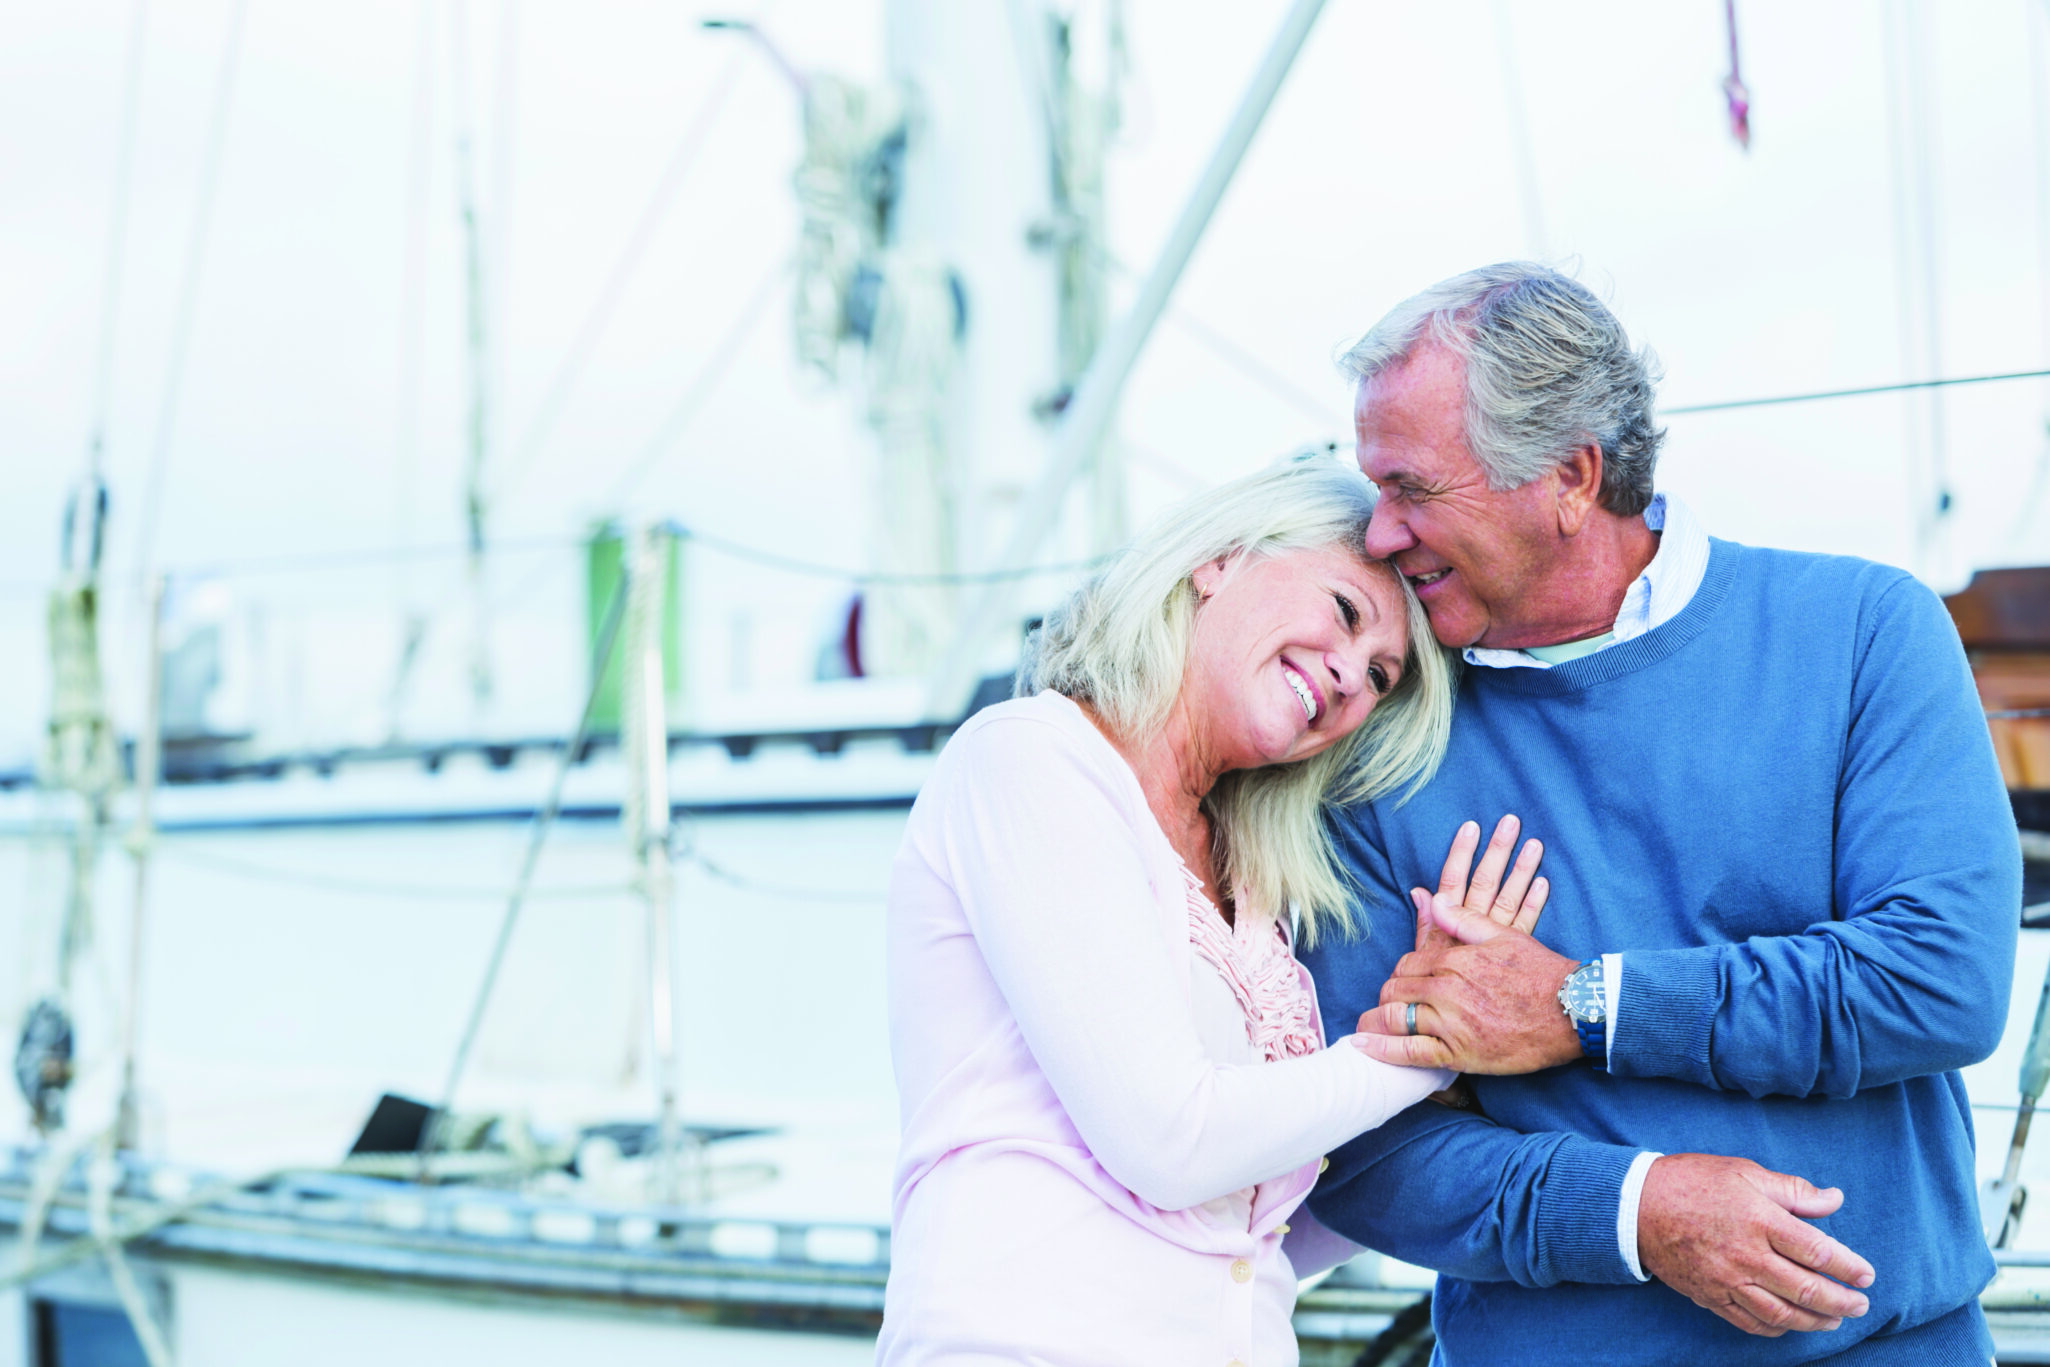 An affectionate, mature couple at a marina standing together on a dock, luxury boats and yachts in the background. The senior man is holding his wife's hand, and she is resting her head on his shoulder, smiling.